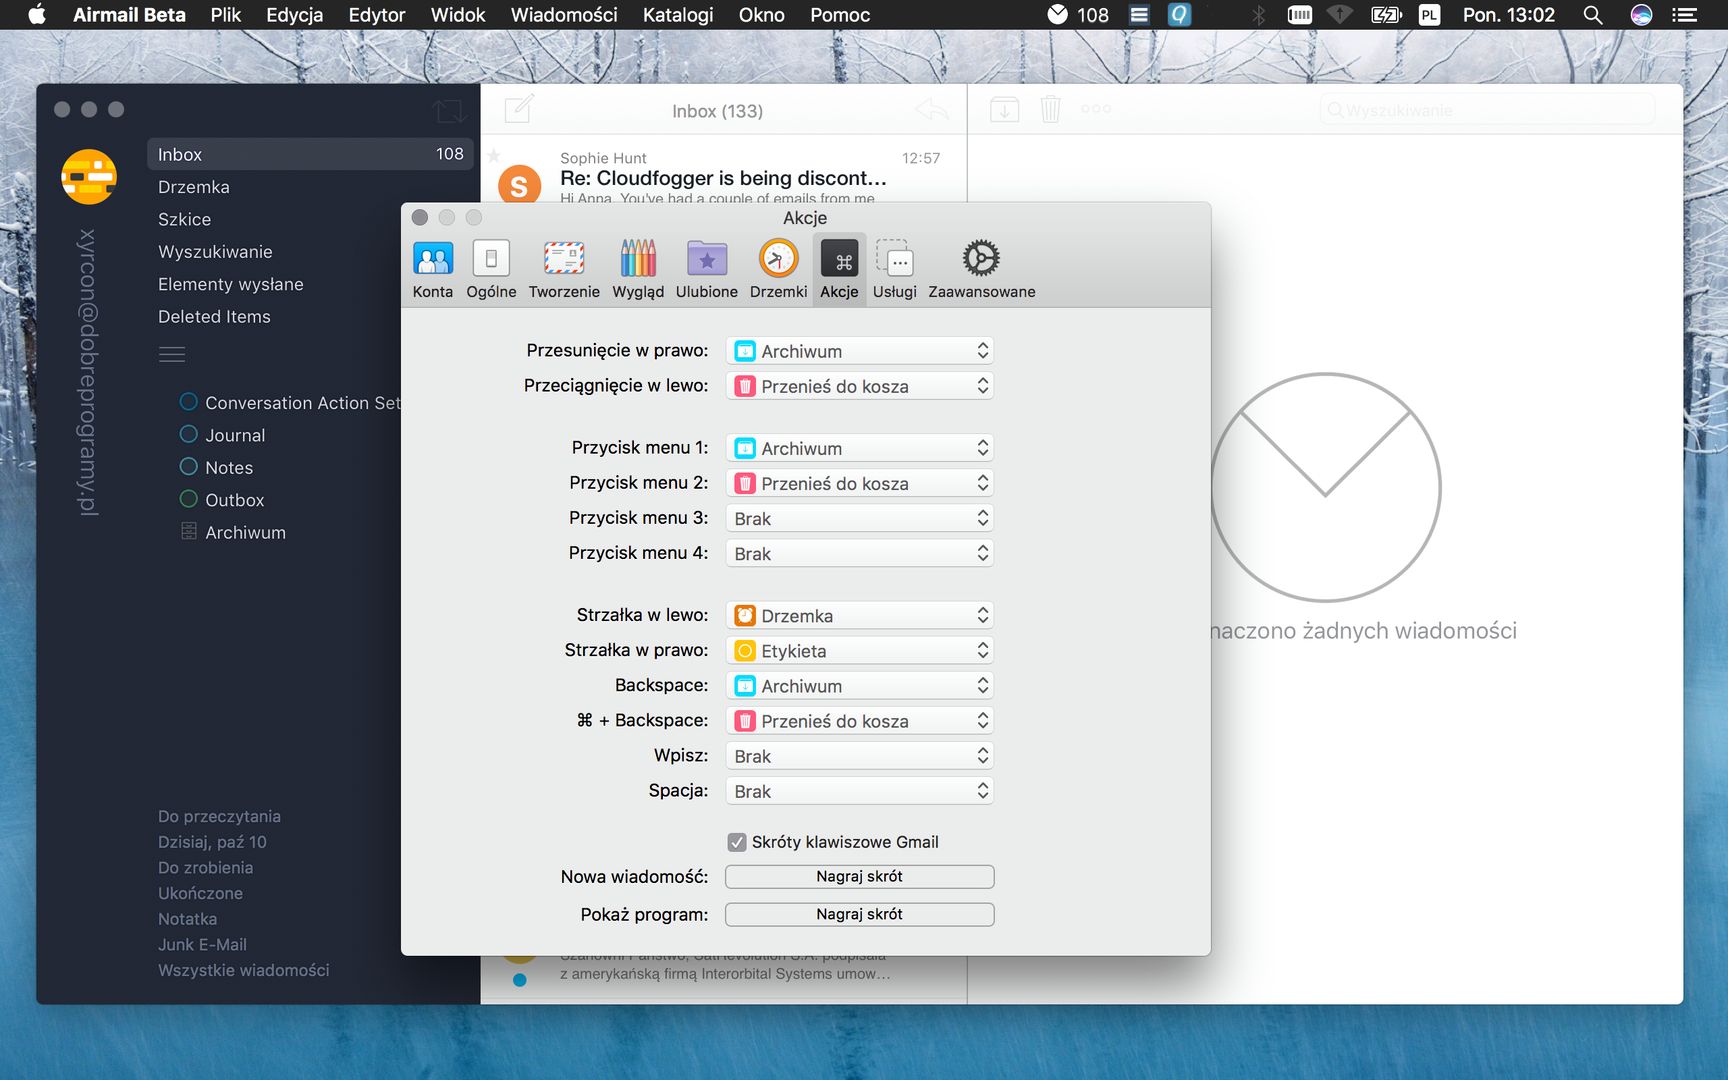 download the last version for mac AirMail Pro